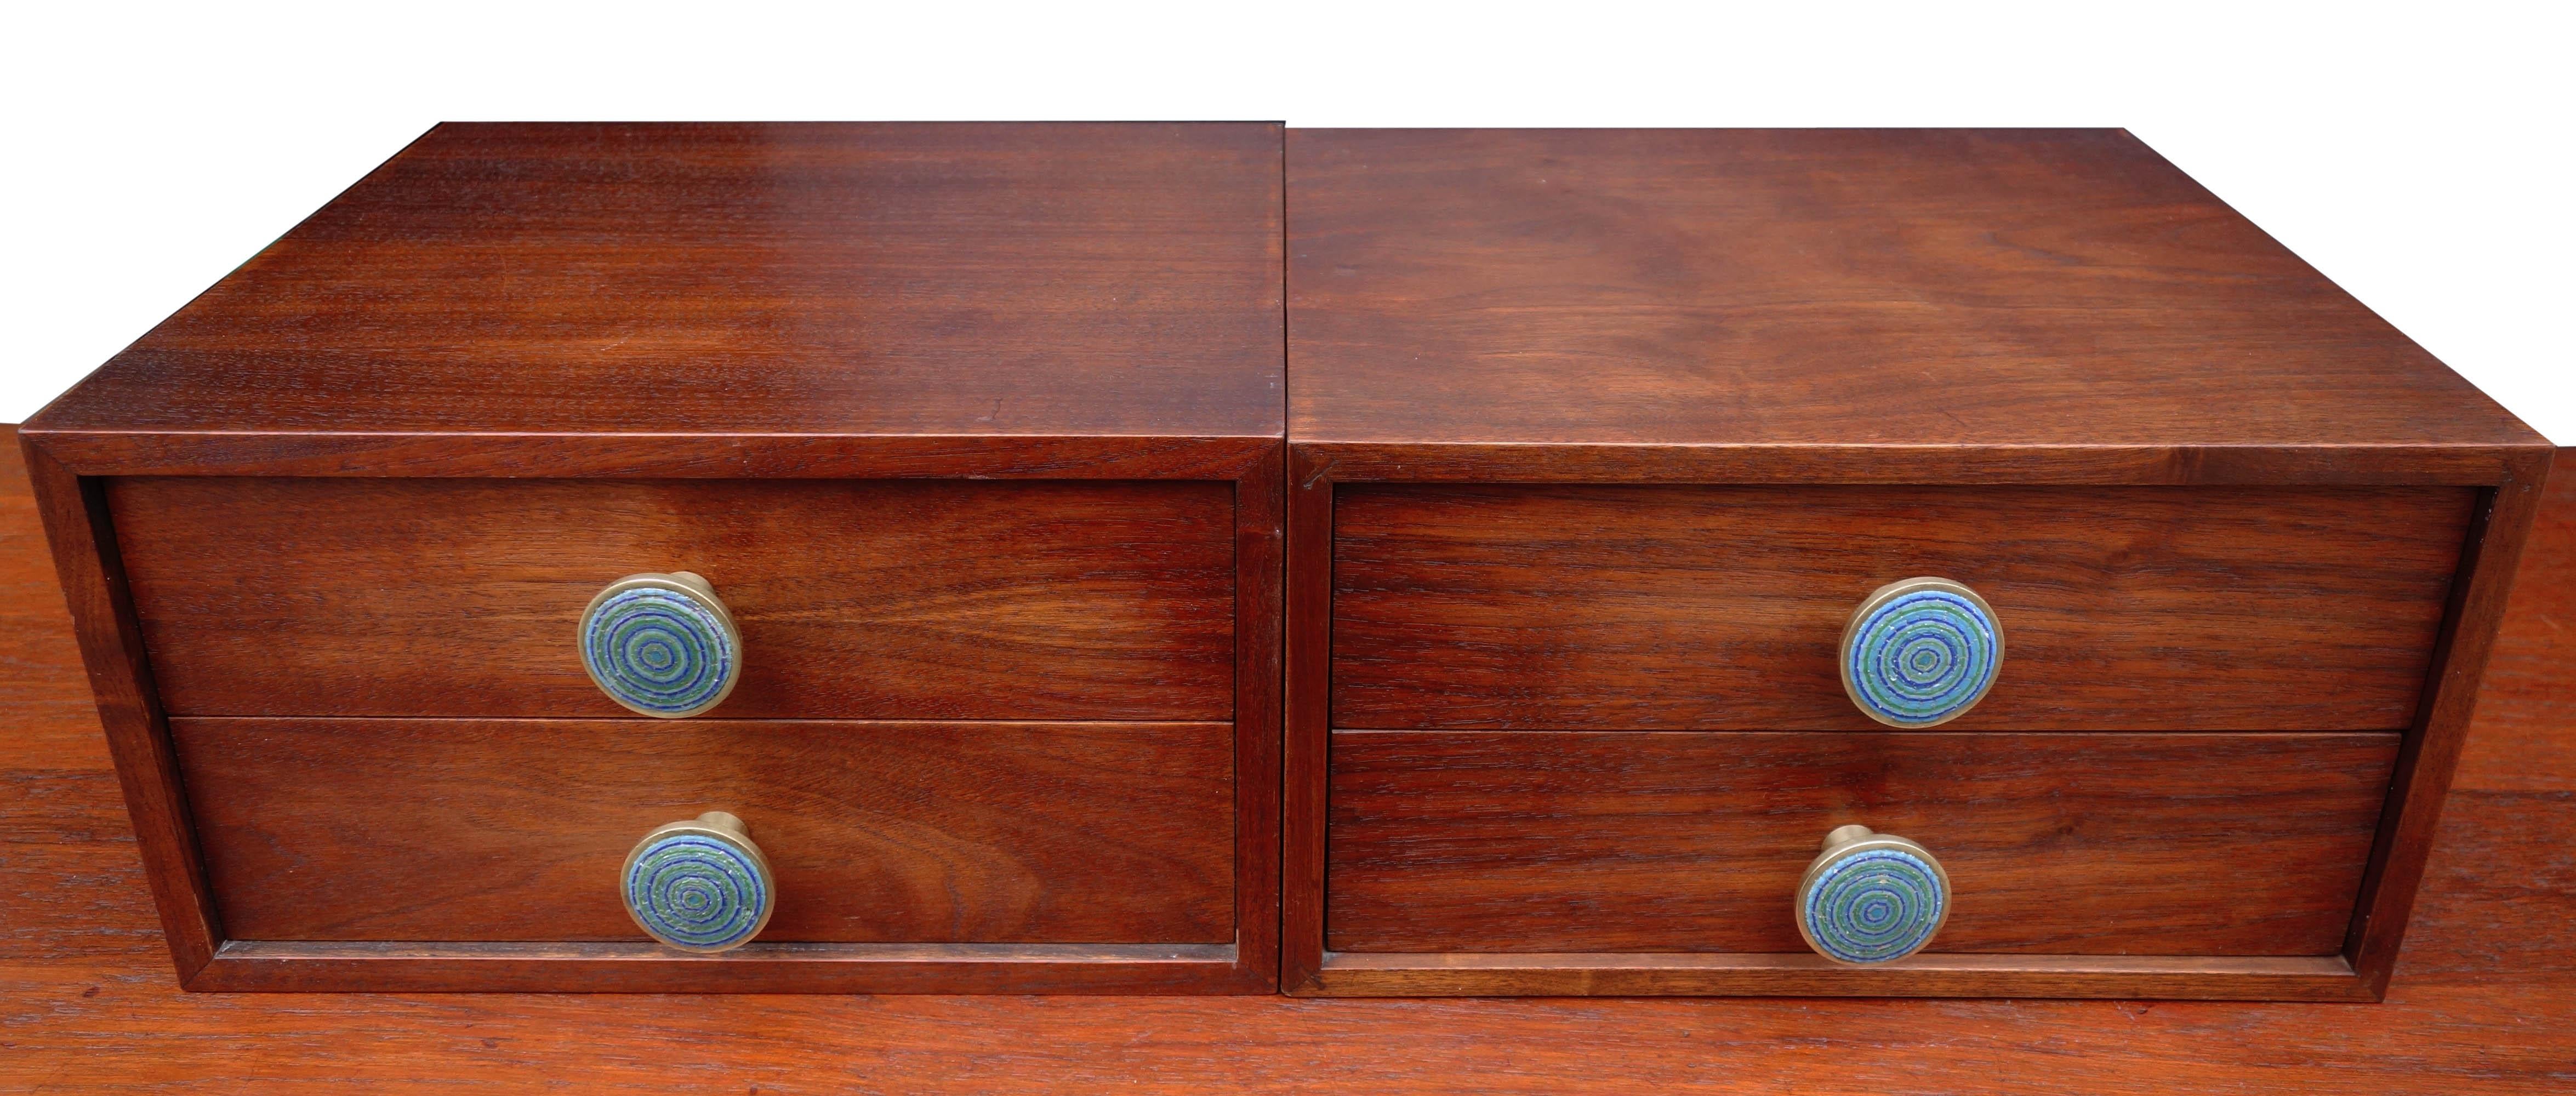 Brass Midcentury Cabinet Top Set of Drawers For Sale